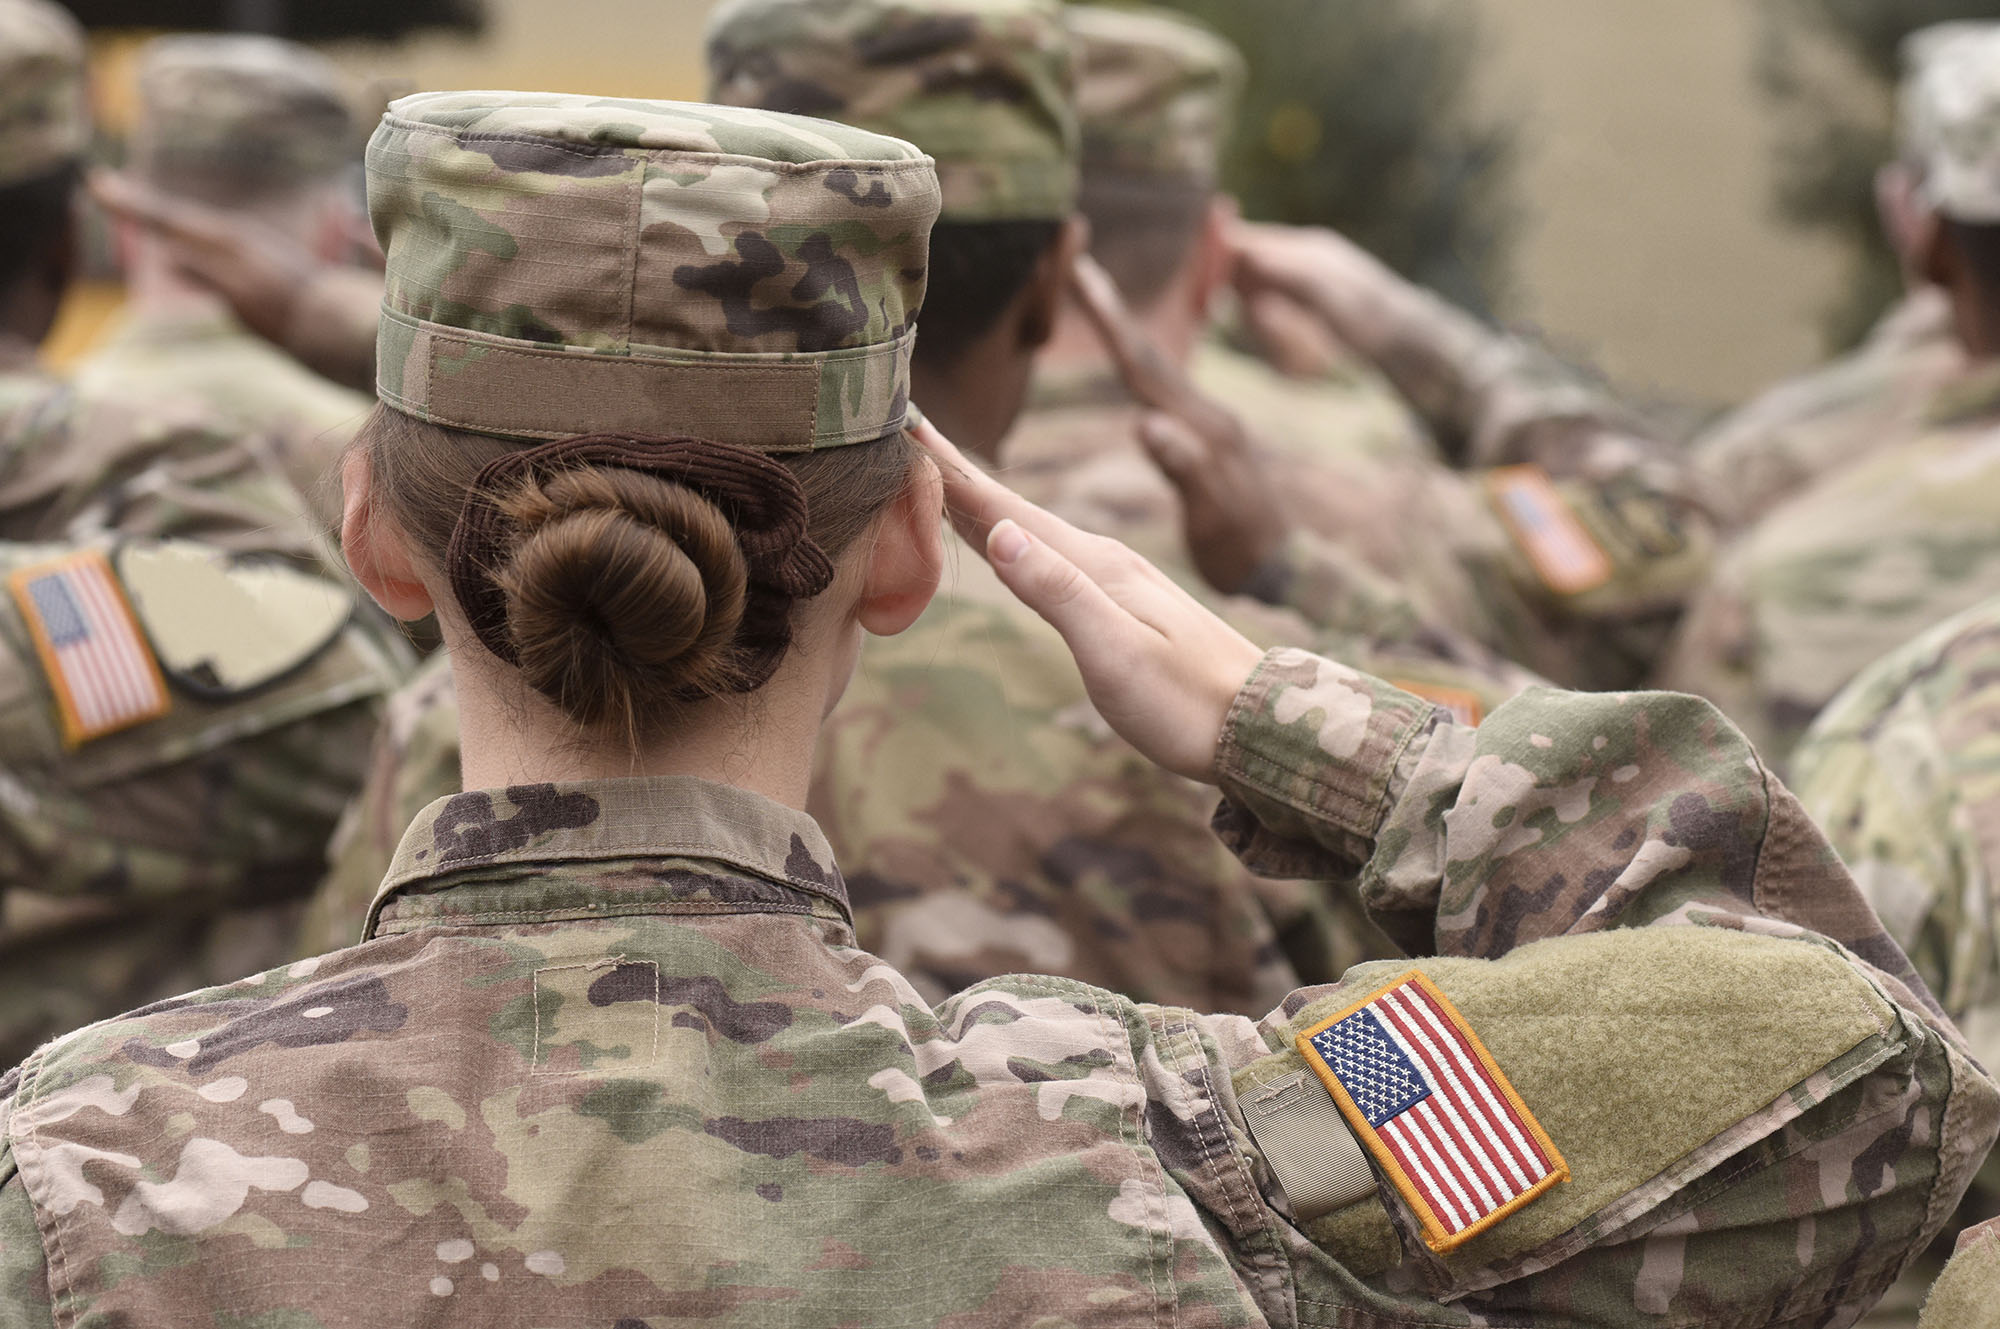 PHOTO: Female American soldiers salute in an undated stock image.